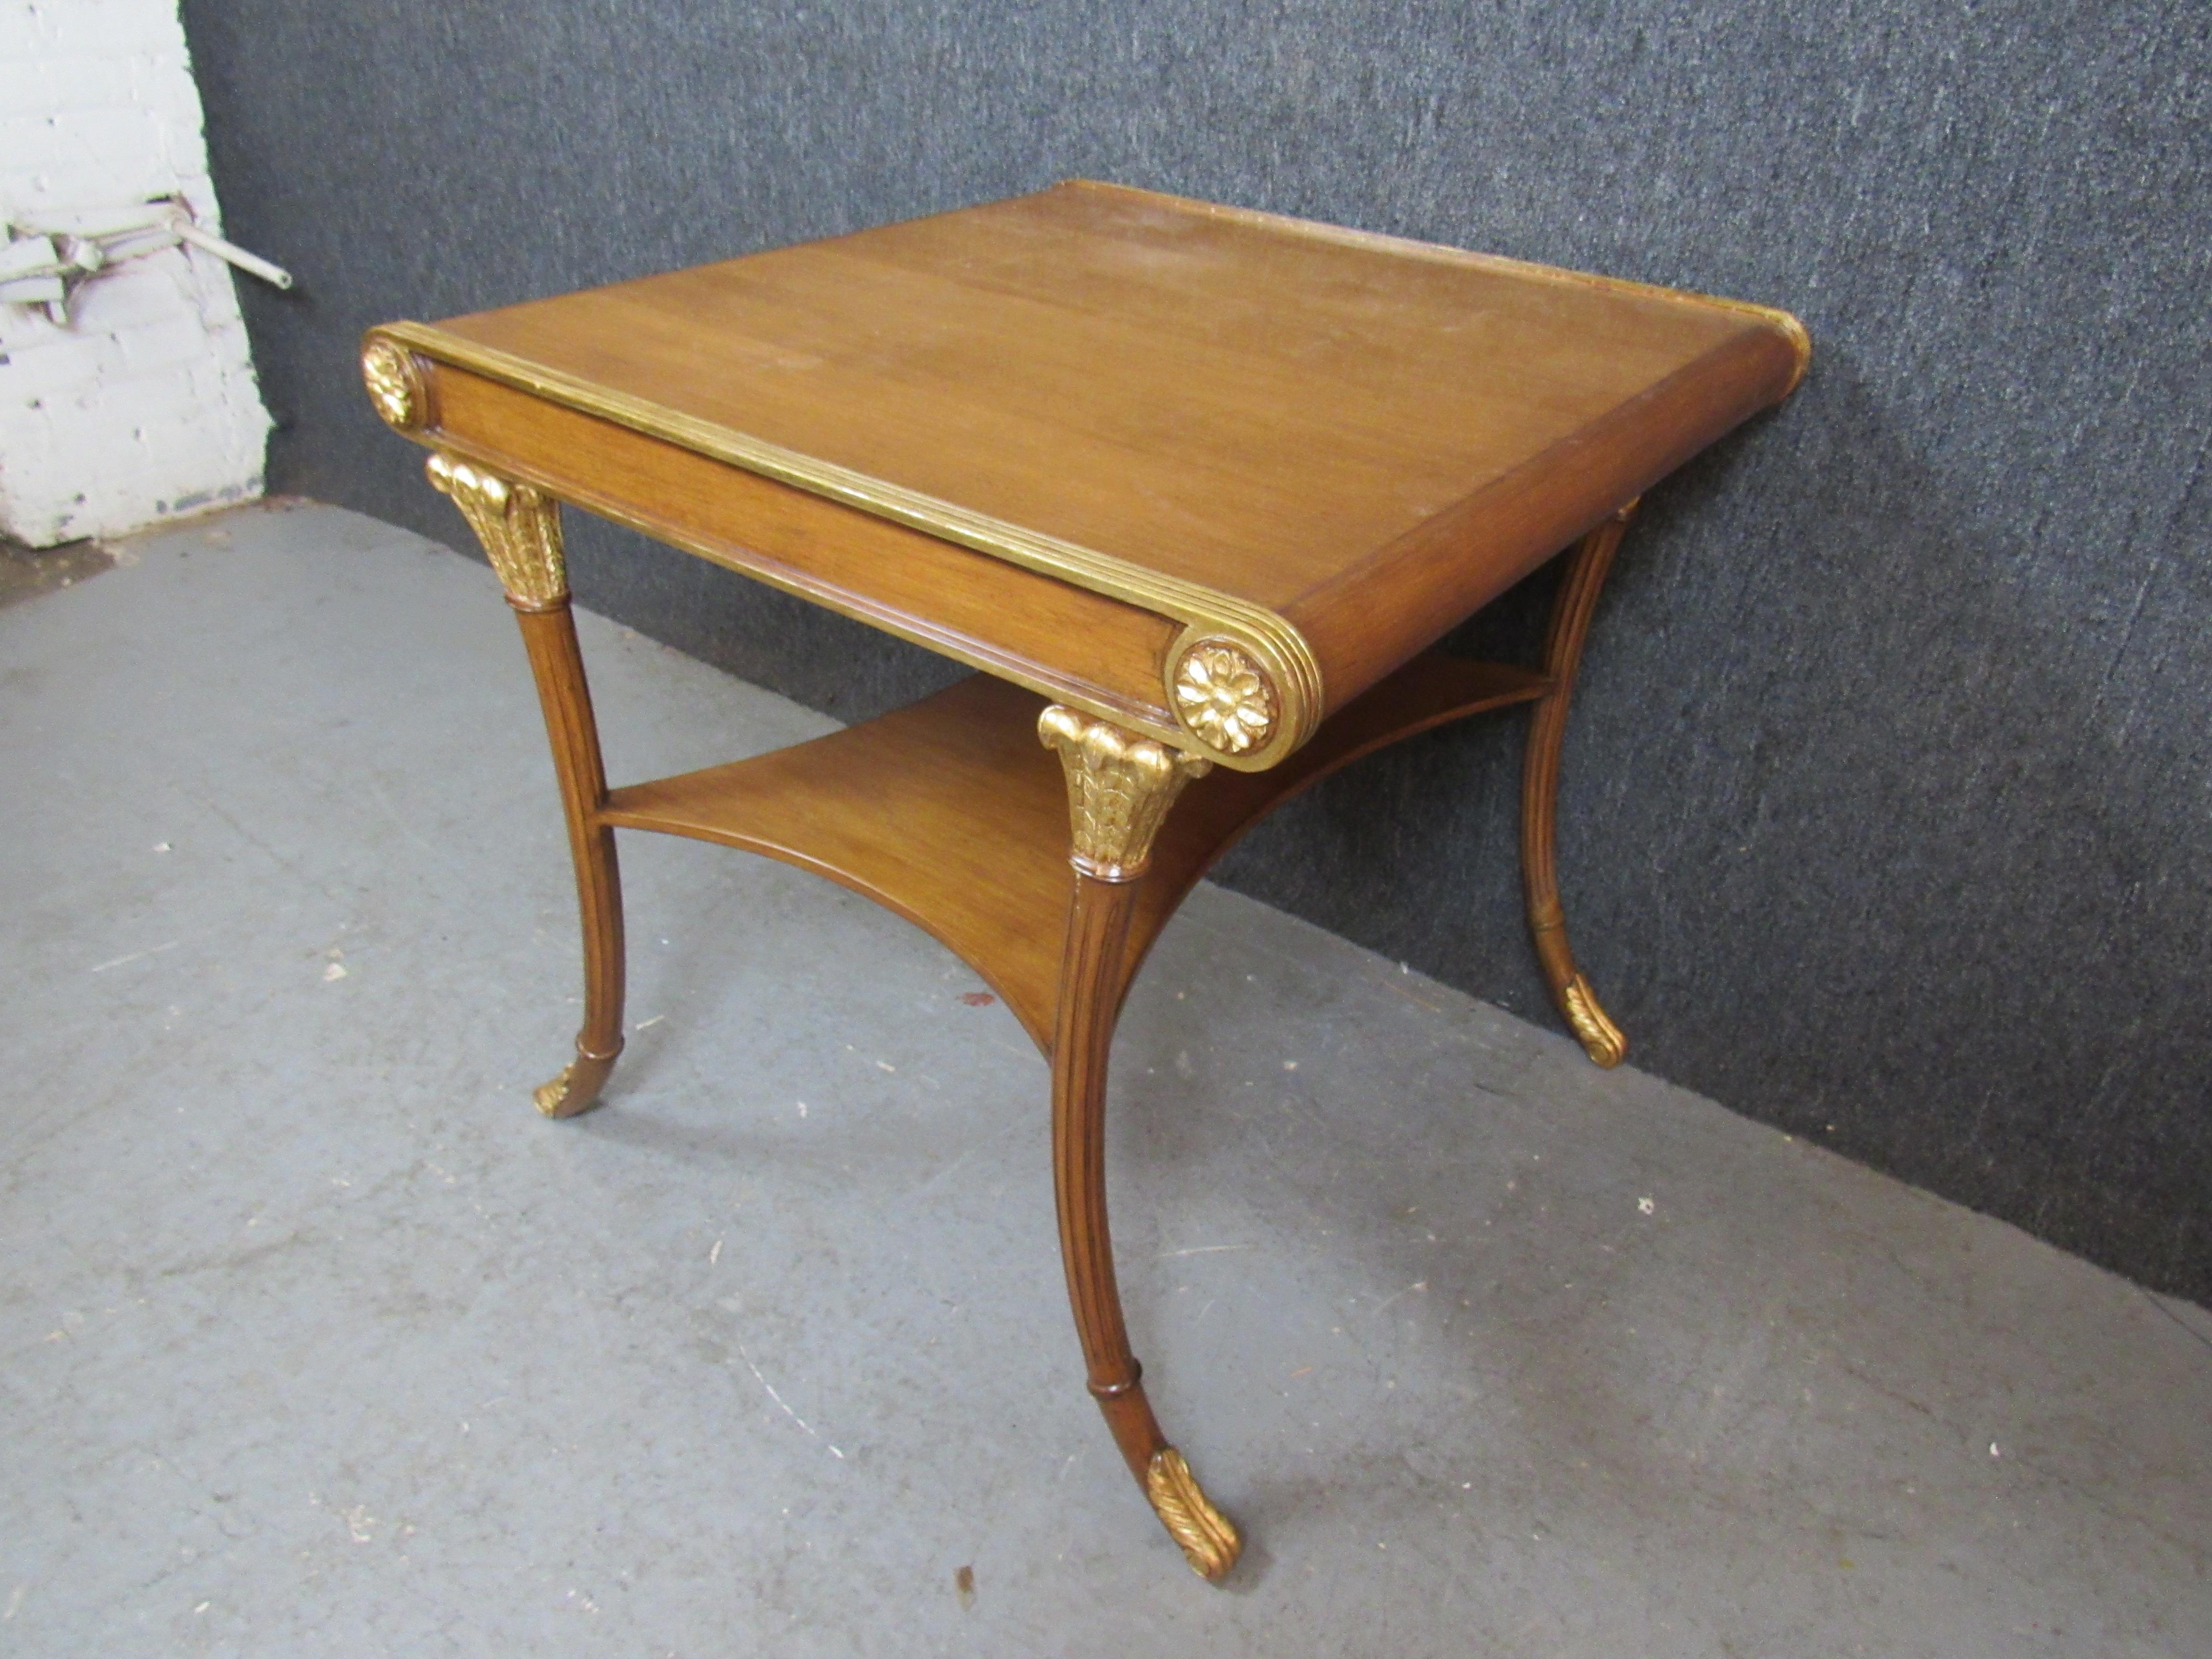 Neoclassical Revival Antique Neoclassical Mahogany Game Table For Sale